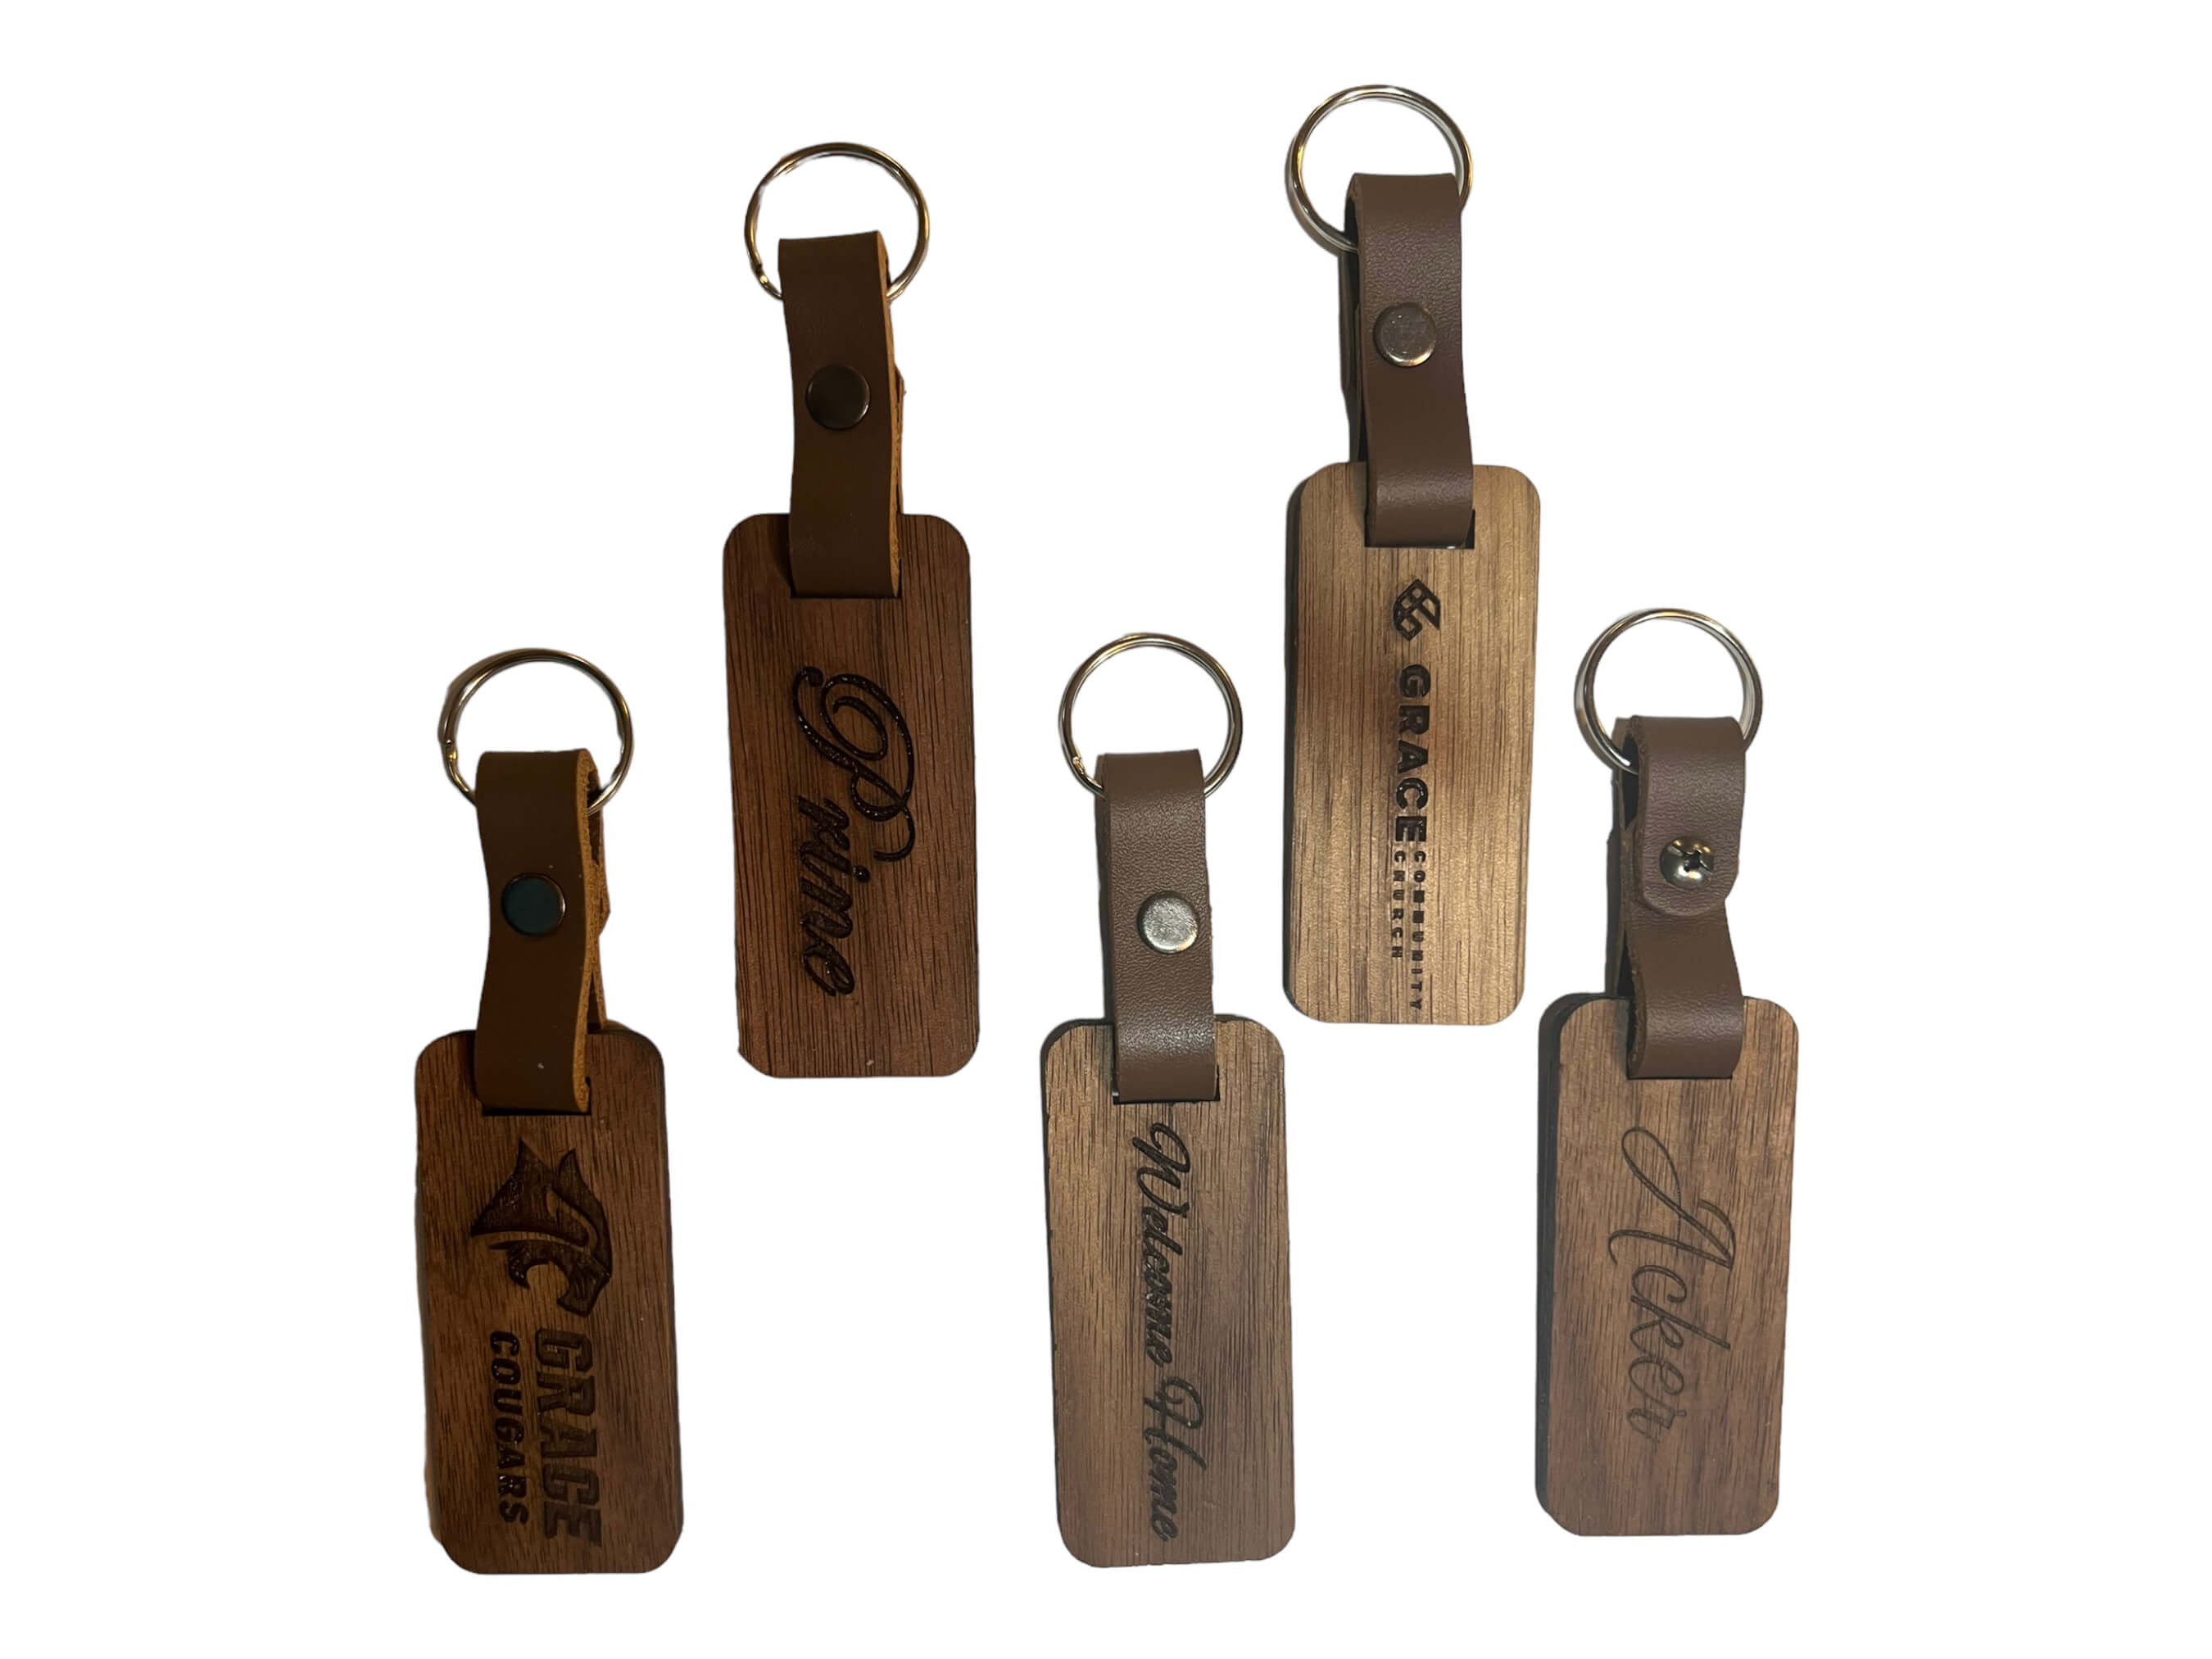 vertical image of the walnut keyrings. Get any inscription you need on these. Makes wonderful gifts. SawyerCustomCrafts.com